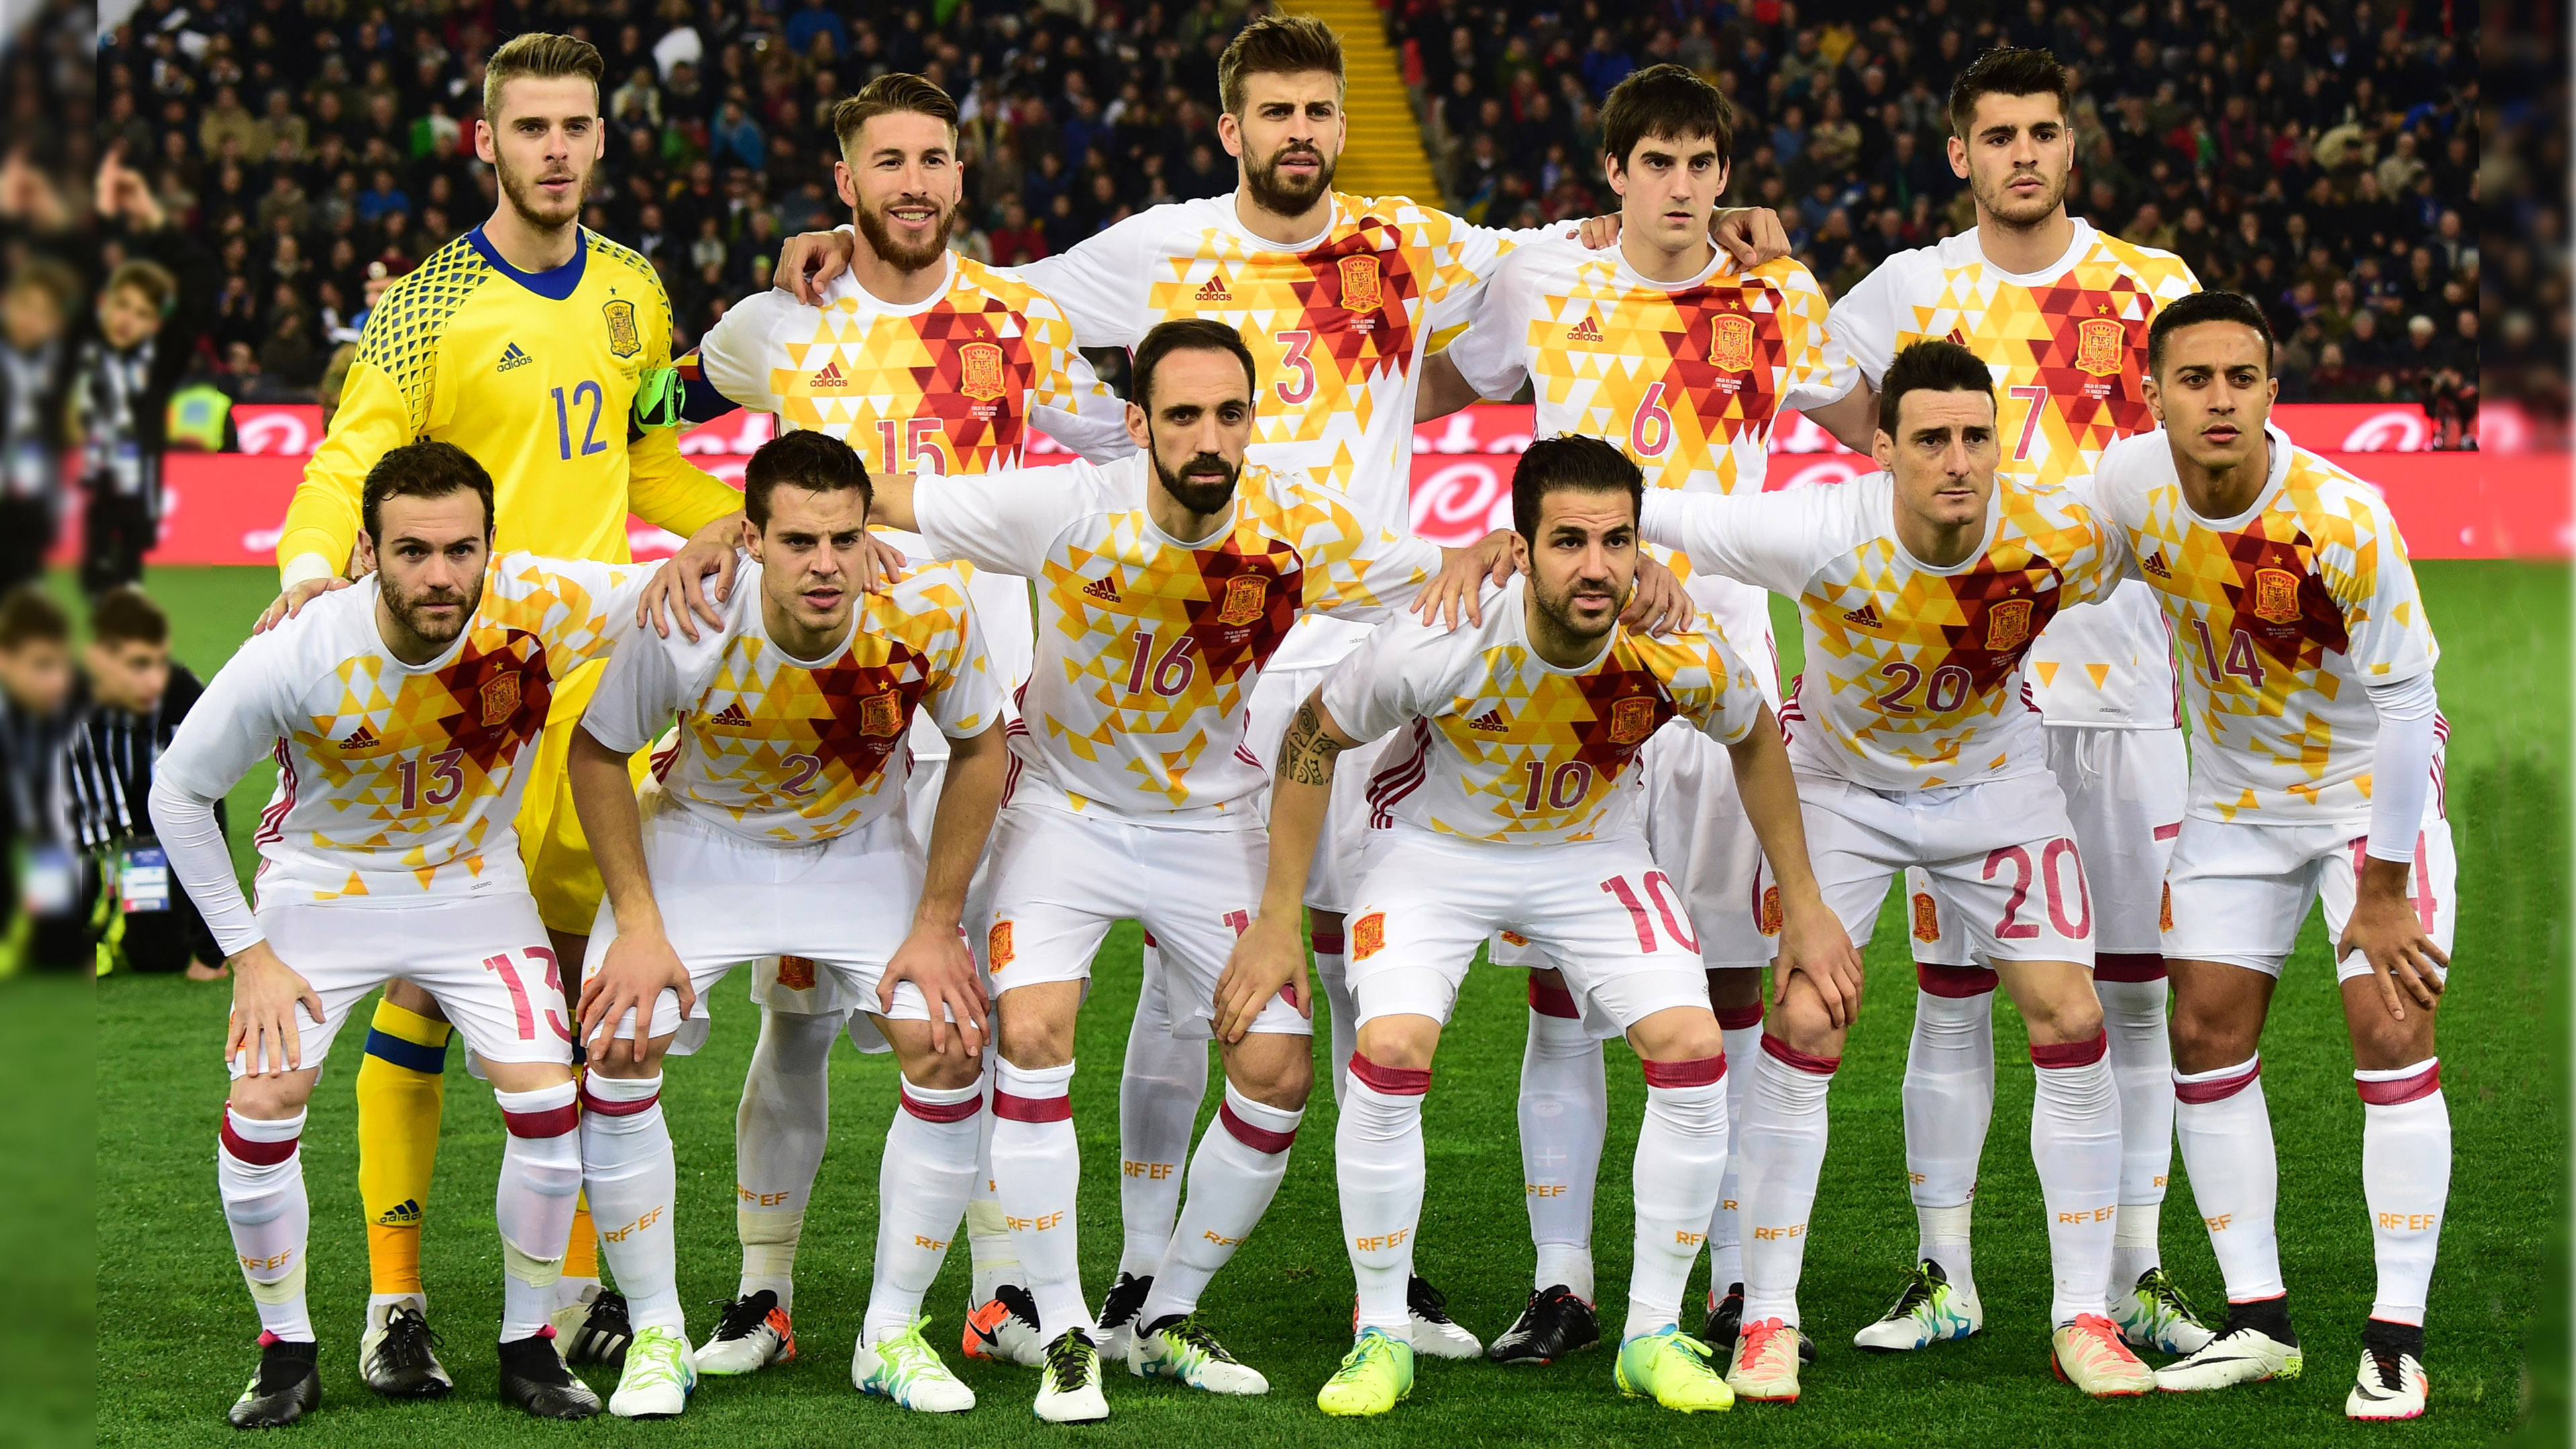 Spain Football Team 2016 with Second Jersey - HD Wallpapers